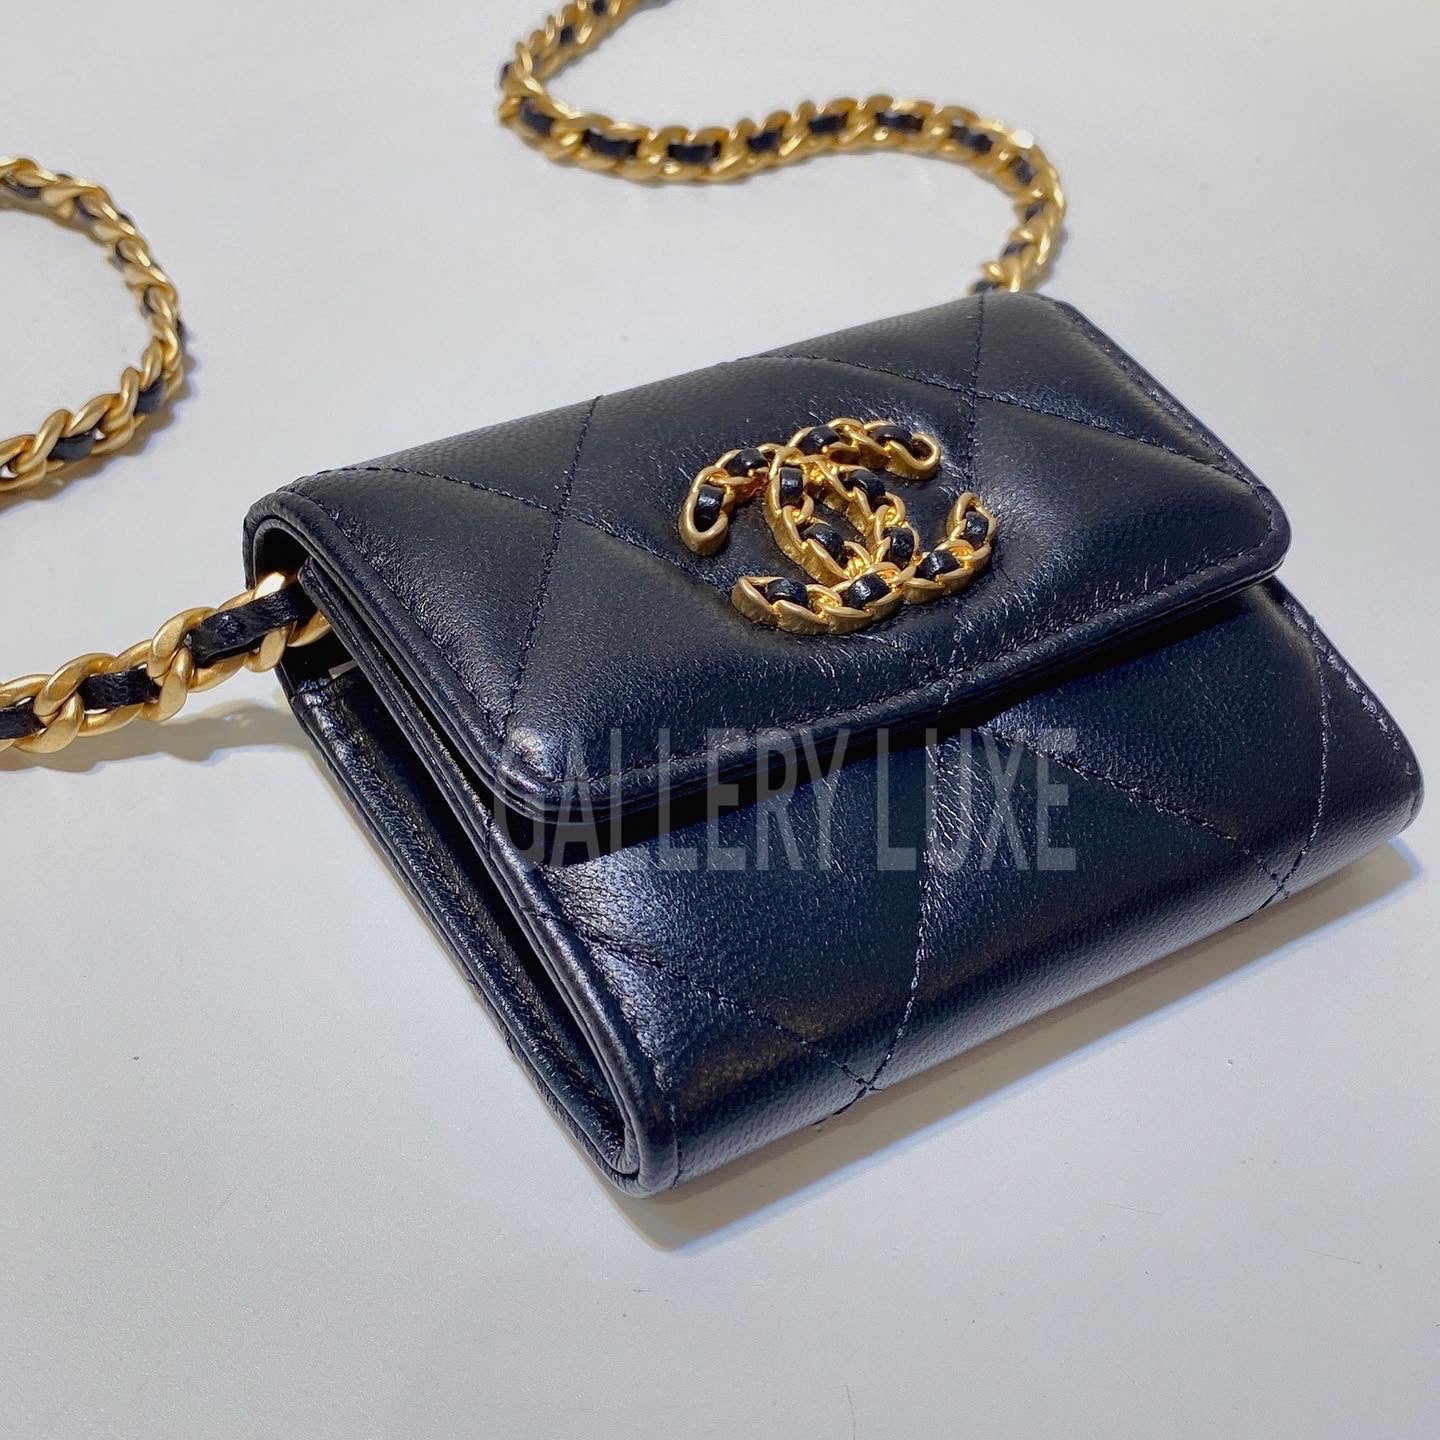 Shop CHANEL 2021-22FW Clutch with chain (AP2398 B06944 94305) by